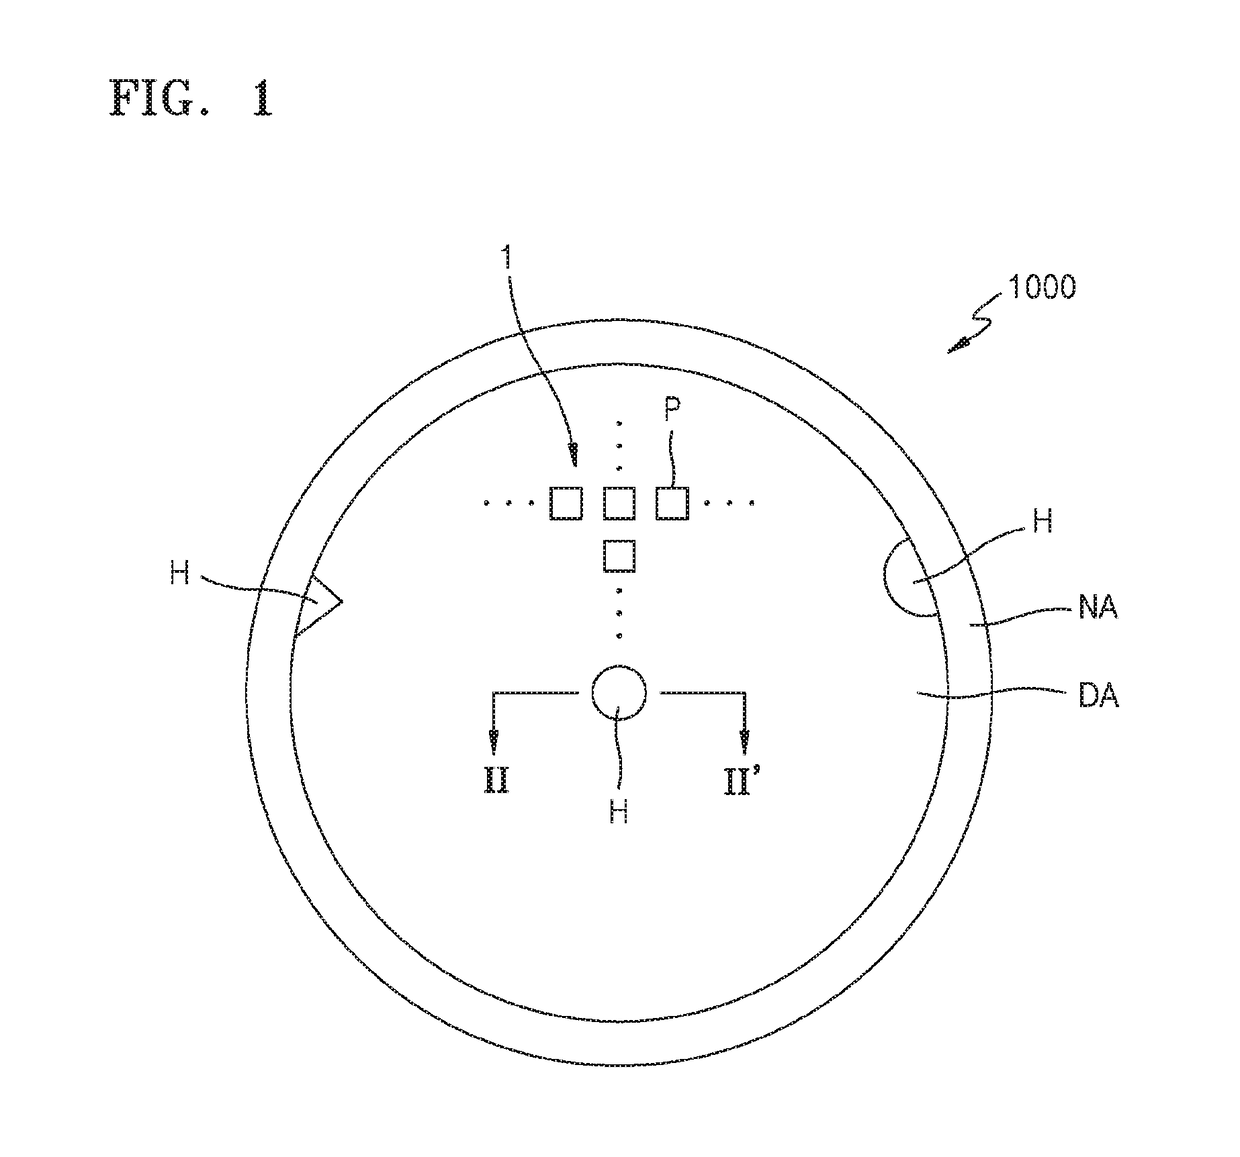 Display apparatus with substrate hole, and method of manufacturing the same